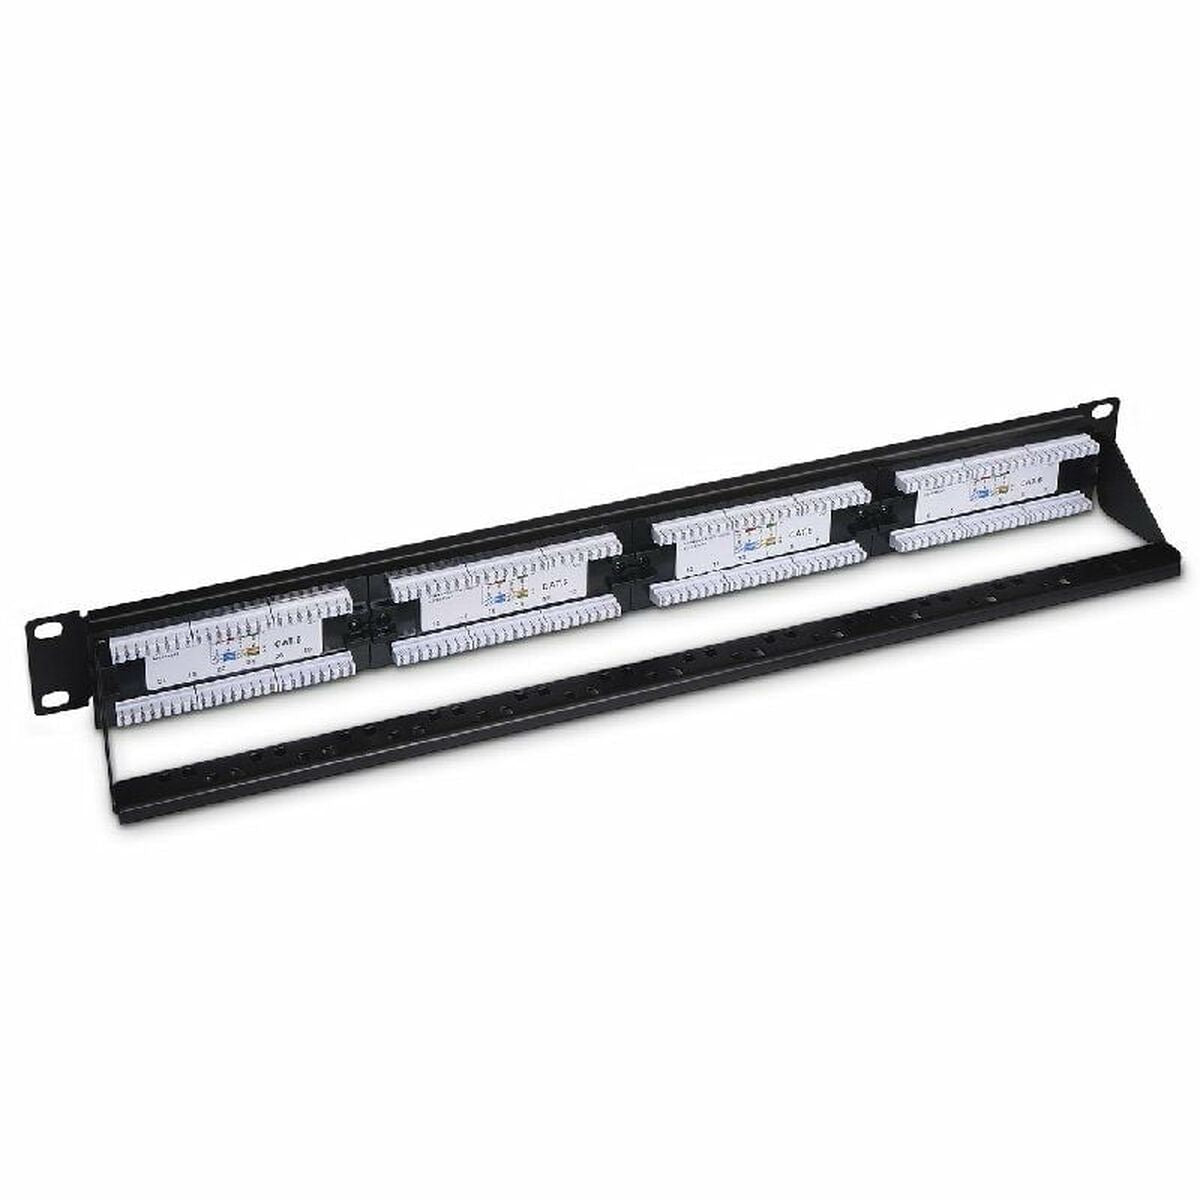 24-port UTP Category 6 Patch Panel Aisens A141-0509, Aisens, Computing, Accessories, 24-port-utp-category-6-patch-panel-aisens-a141-0509, Brand_Aisens, category-reference-2609, category-reference-2803, category-reference-2828, category-reference-t-19685, category-reference-t-19908, category-reference-t-21349, Condition_NEW, furniture, networks/wiring, organisation, Price_20 - 50, Teleworking, RiotNook